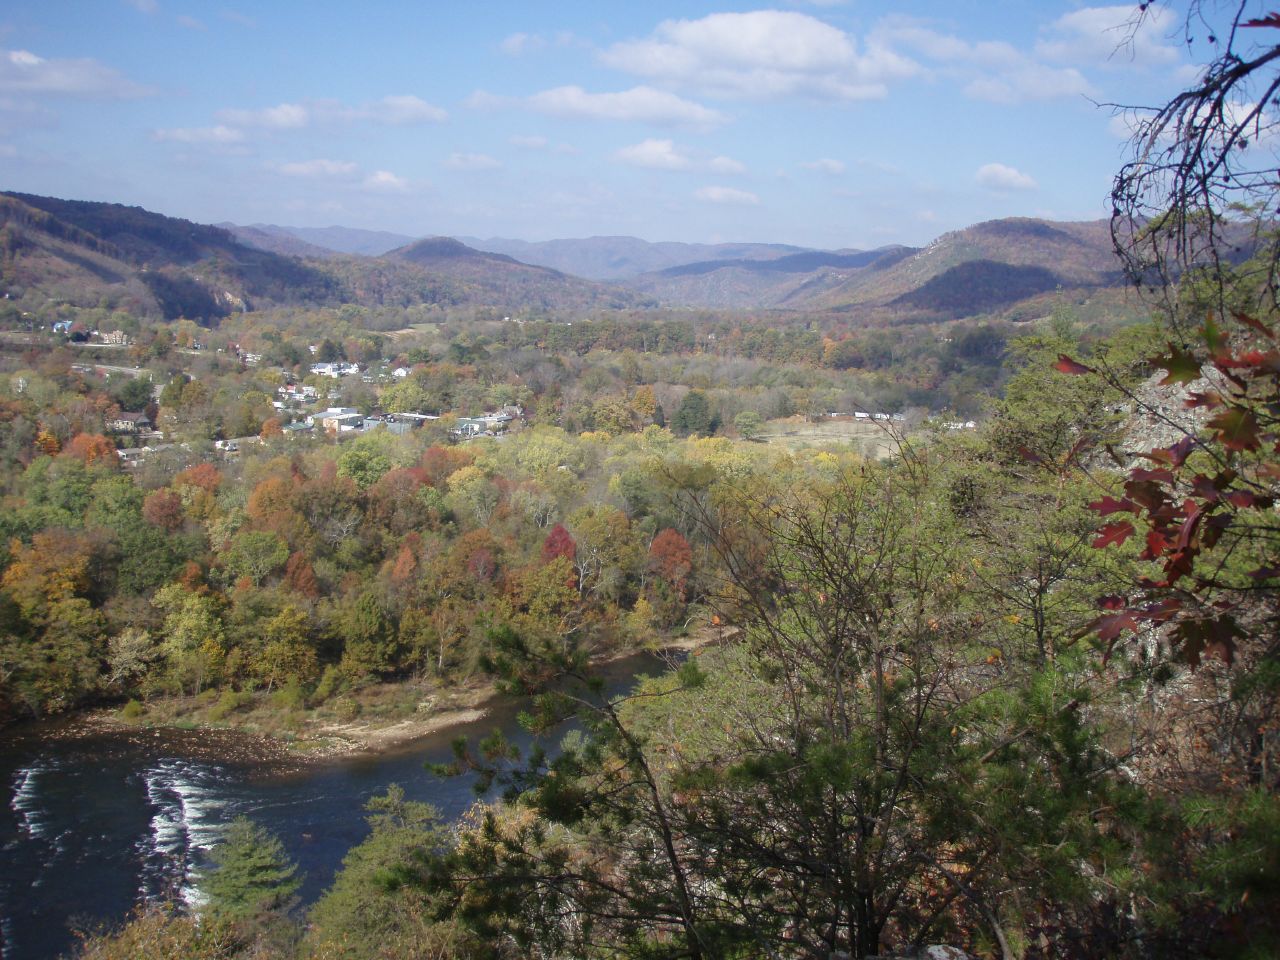 A view of Hot Springs, NC. A wooded view with a river in the foreground.